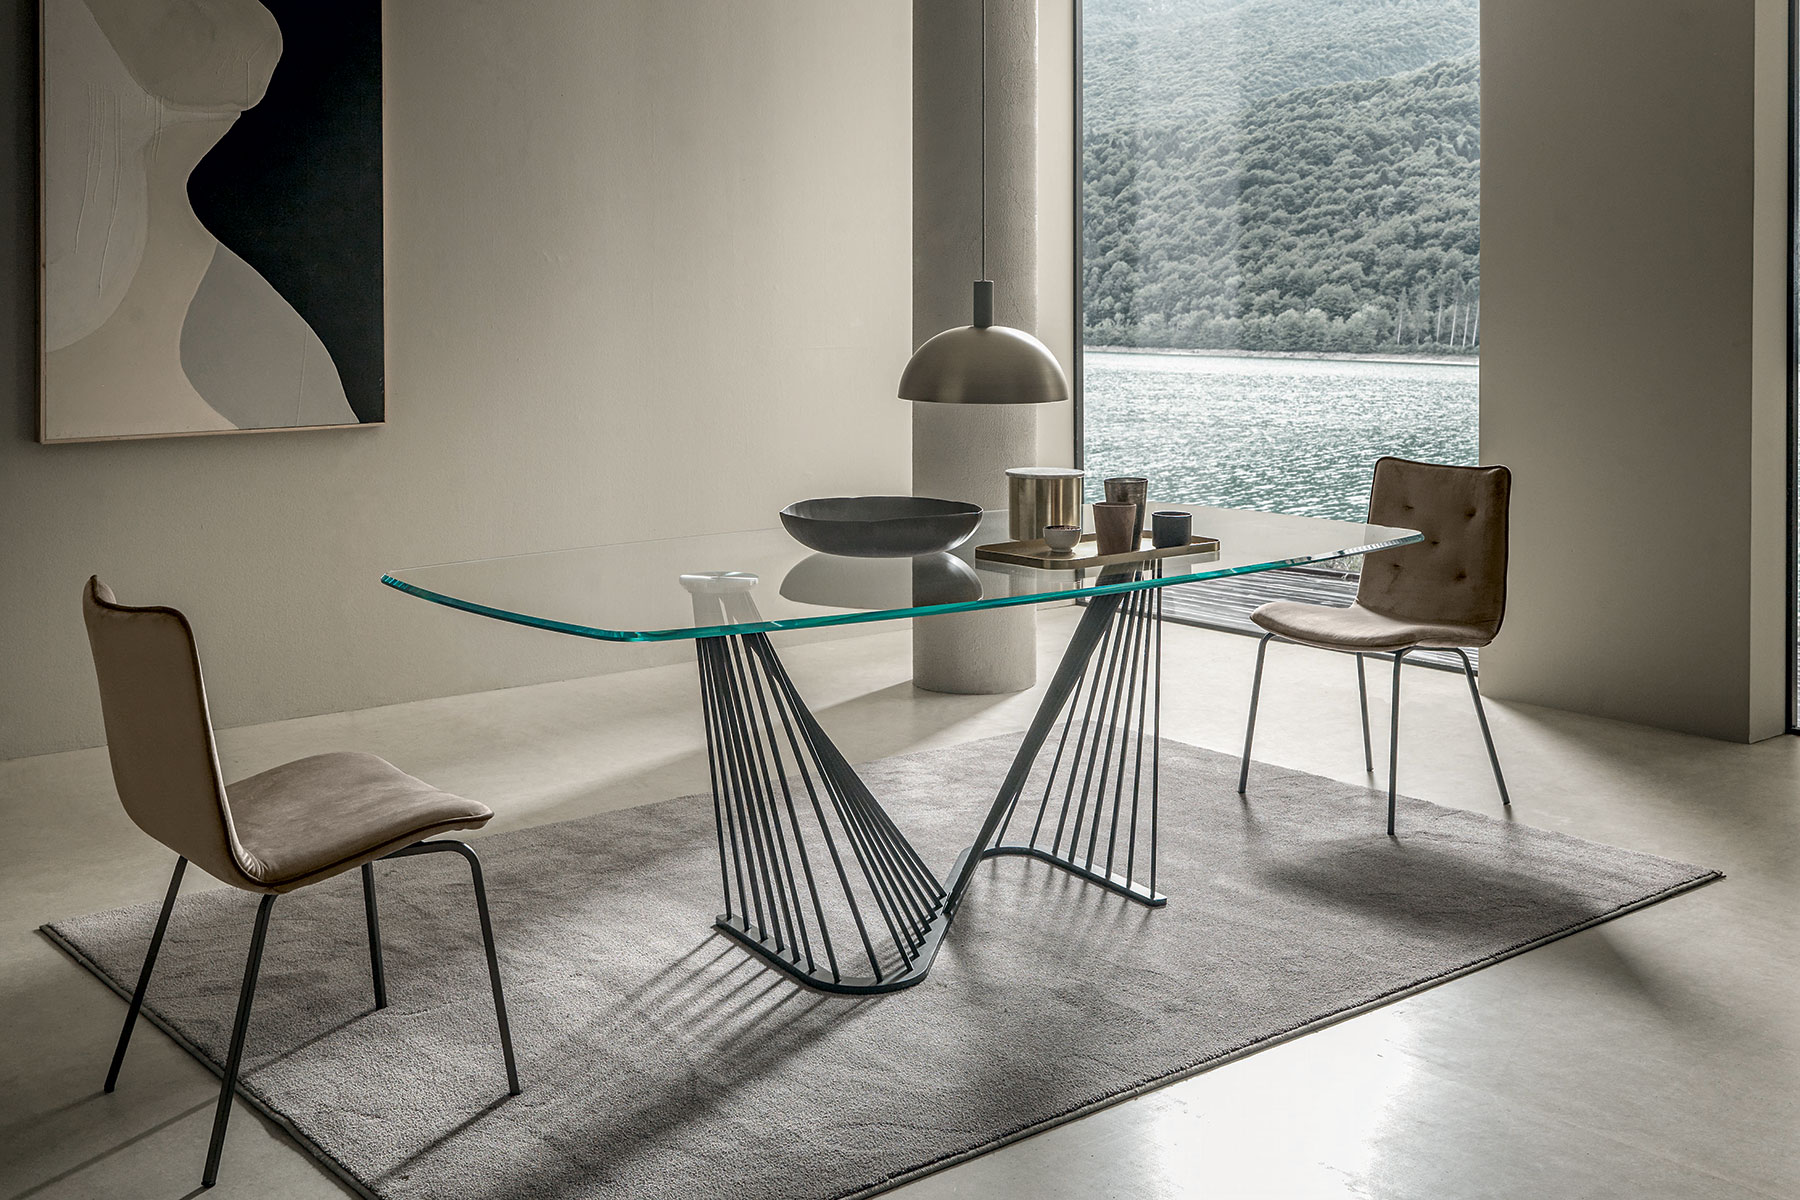 A luxurious table with barrel glass top and metal sinuous base. Andrea Lucatello created it to furnish the most elegant homes. Free home delivery.